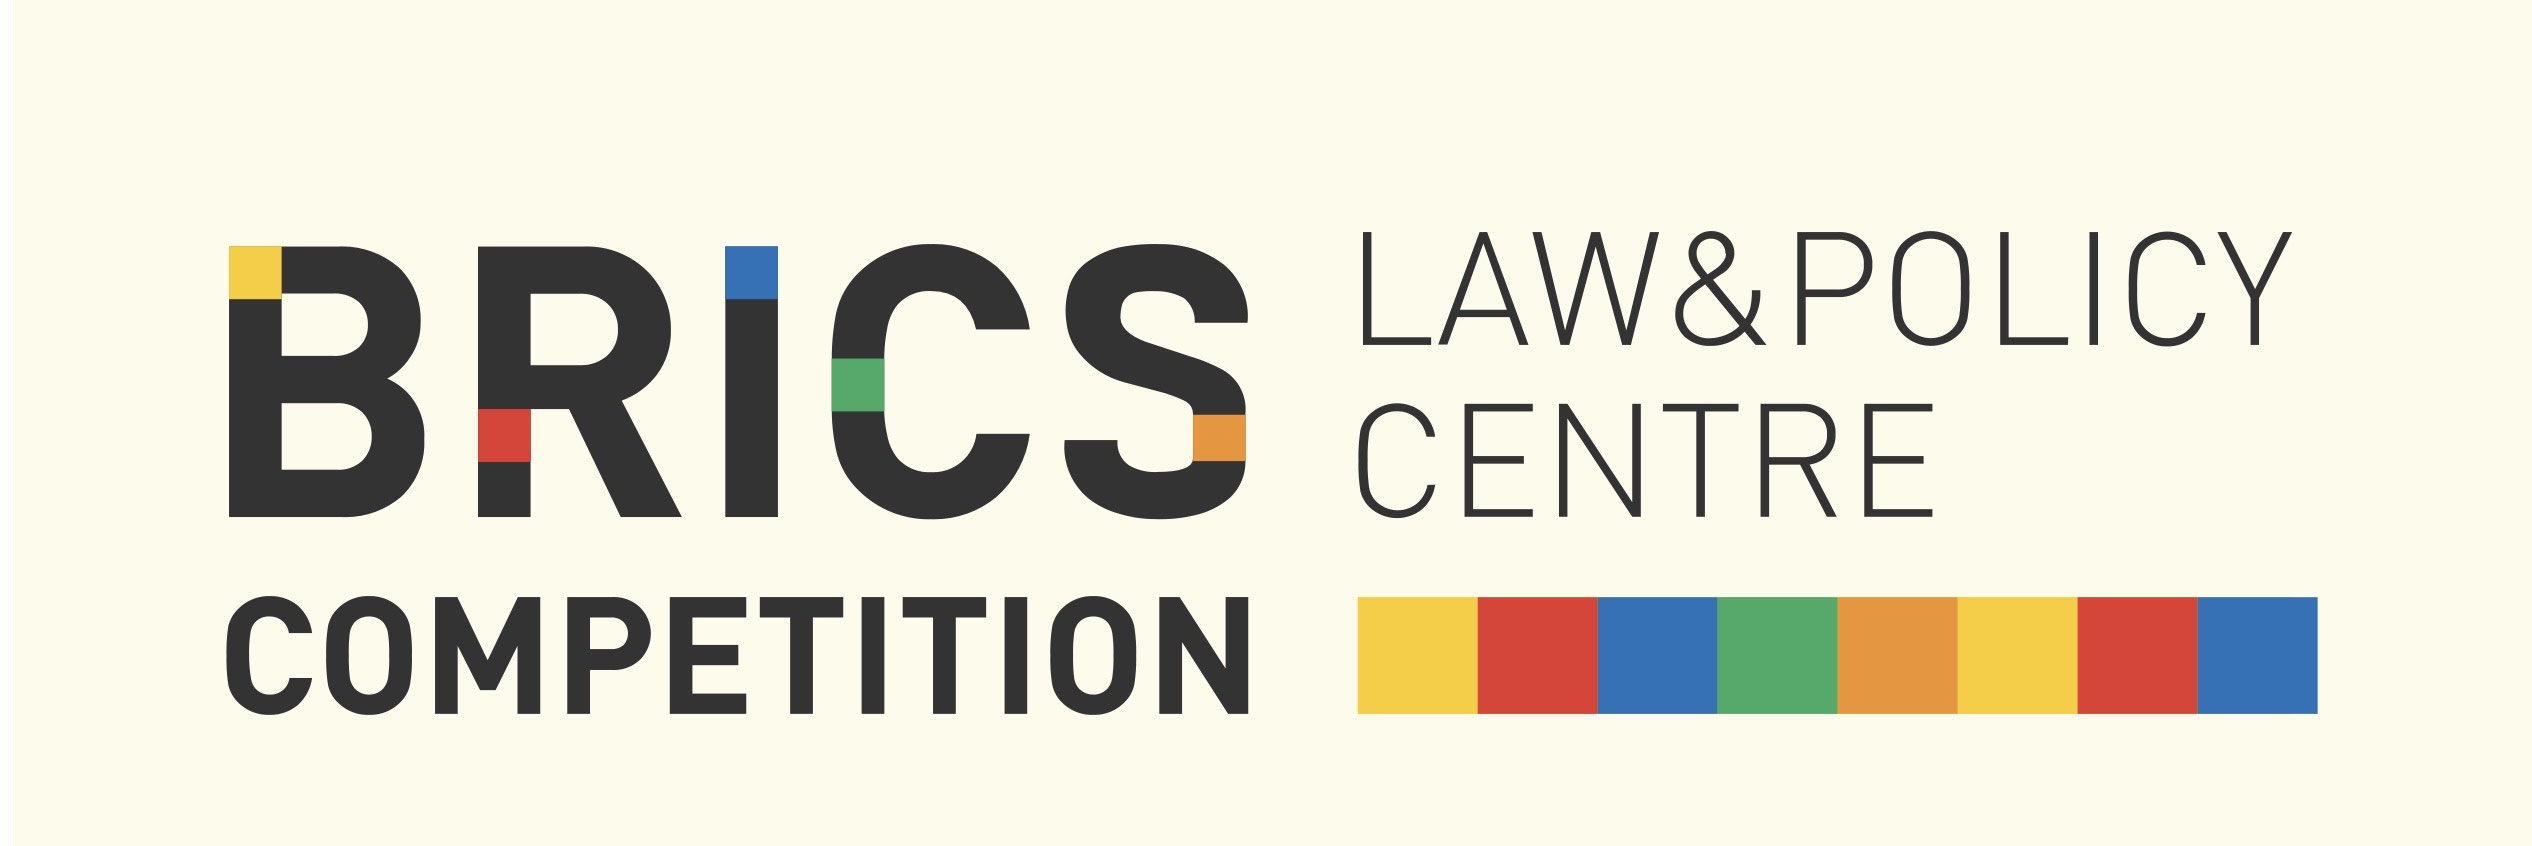 BRICS Competition Law and Policy Centre